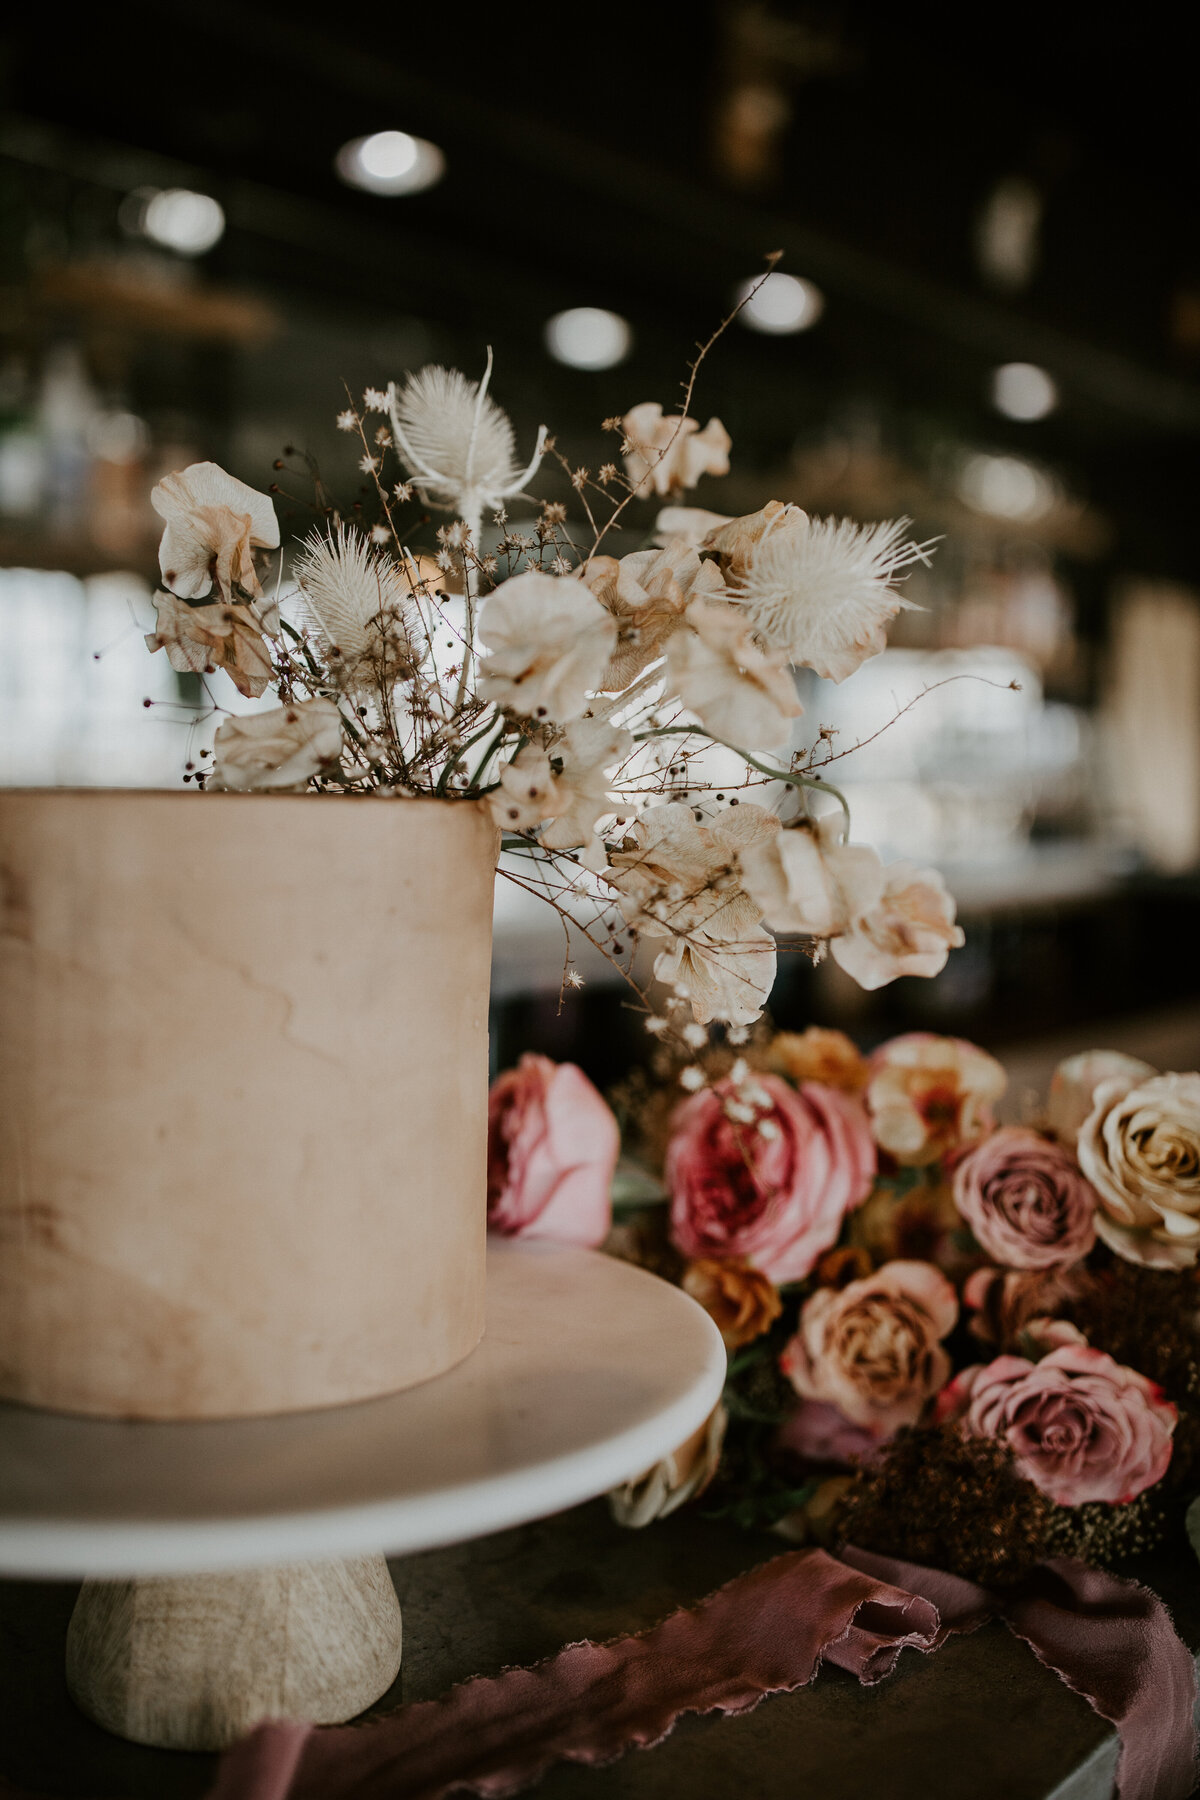 A cream-colored cake with ivory flowers sitting on a marble cake stand with pink and mauve flowers.